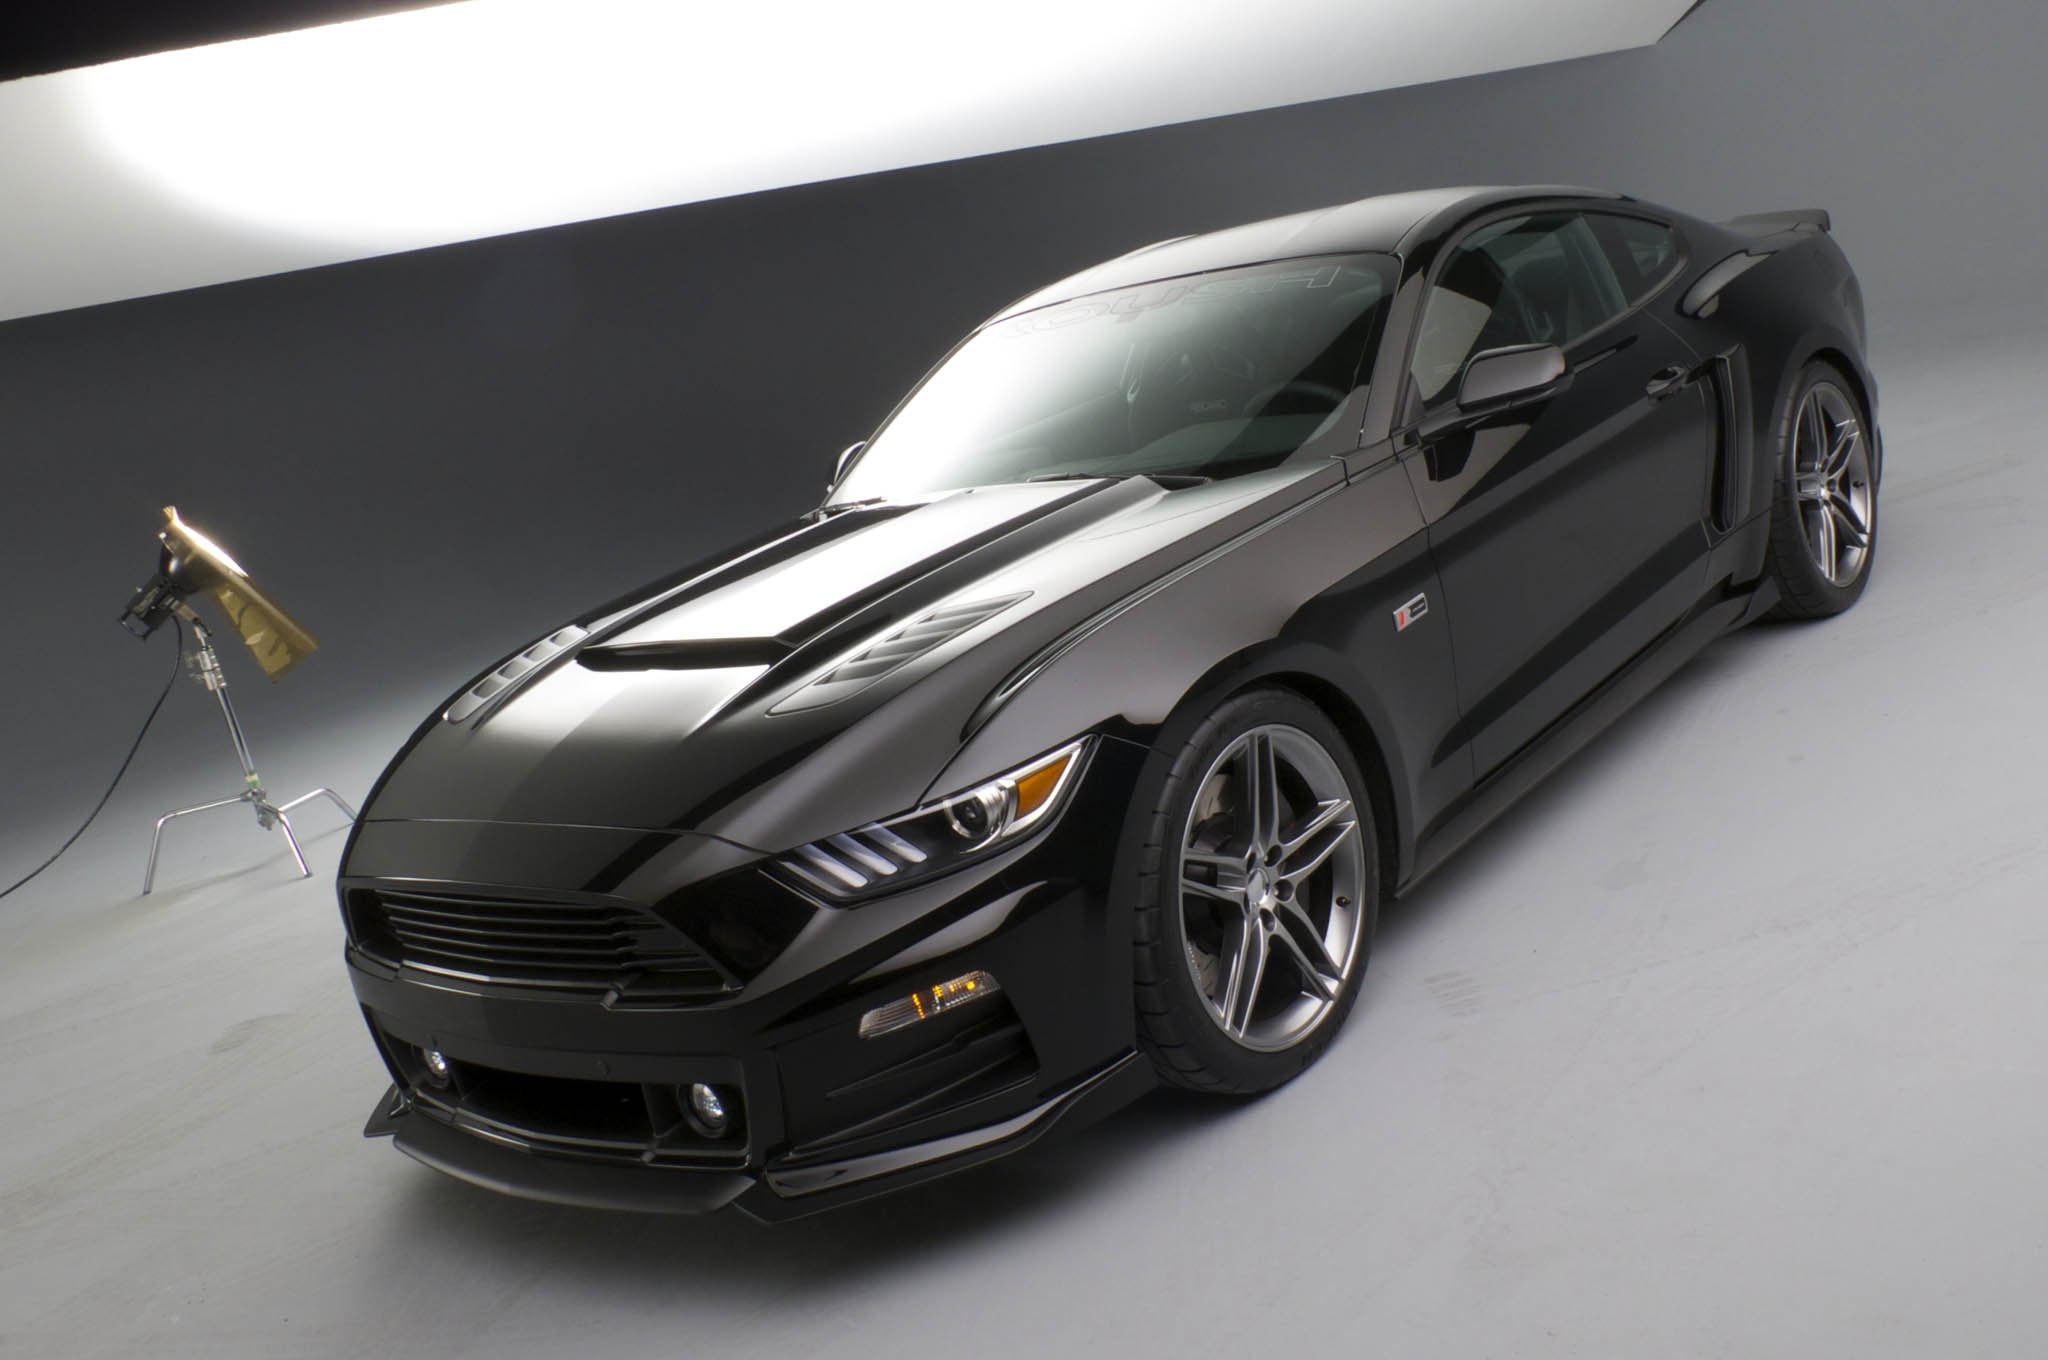 2015, Roush, R s, P550, Ford, Mustang, Muscle Wallpaper